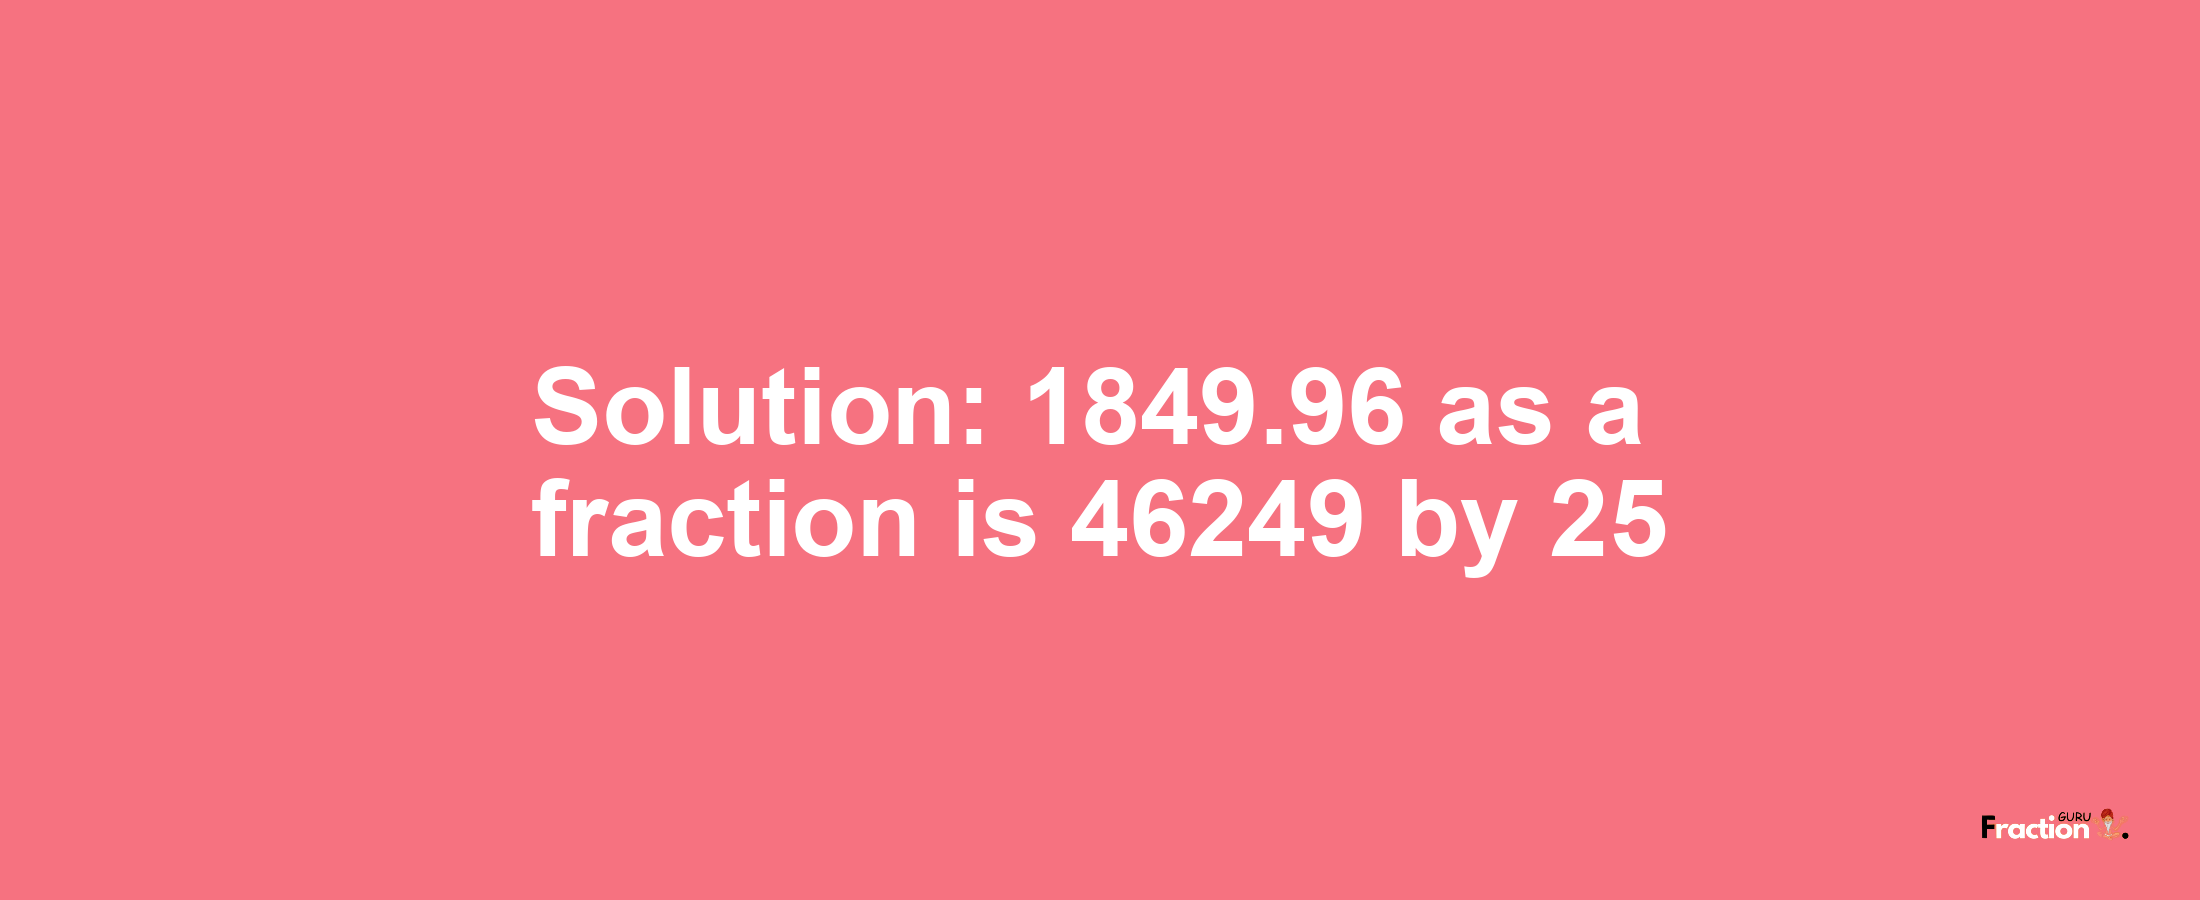 Solution:1849.96 as a fraction is 46249/25